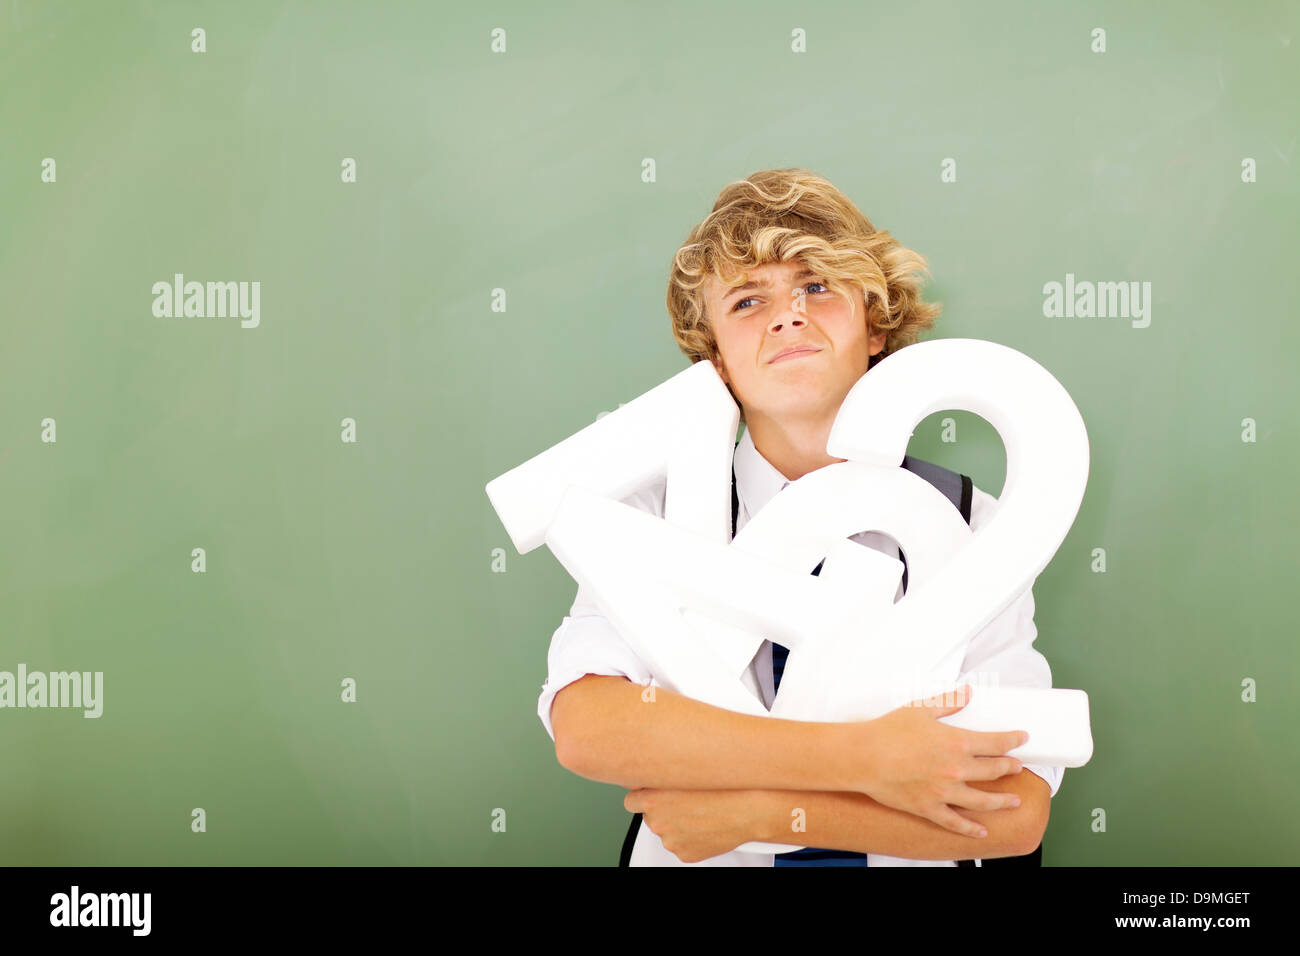 young male high school student thinking about mathematics subject Stock Photo